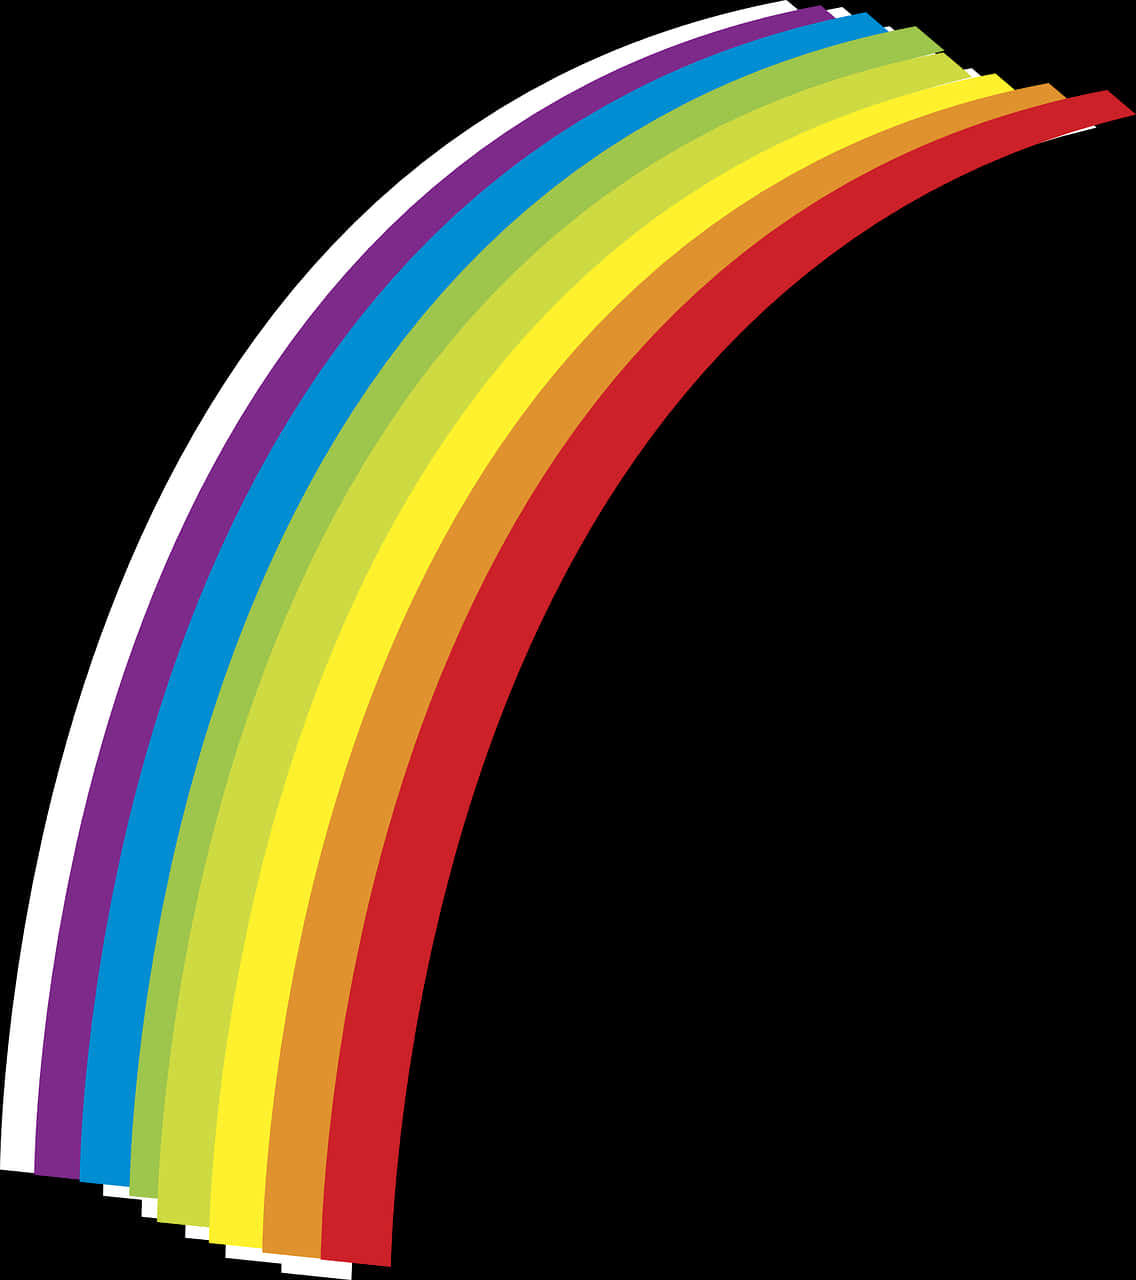 Colorful Rainbow Arch Graphic